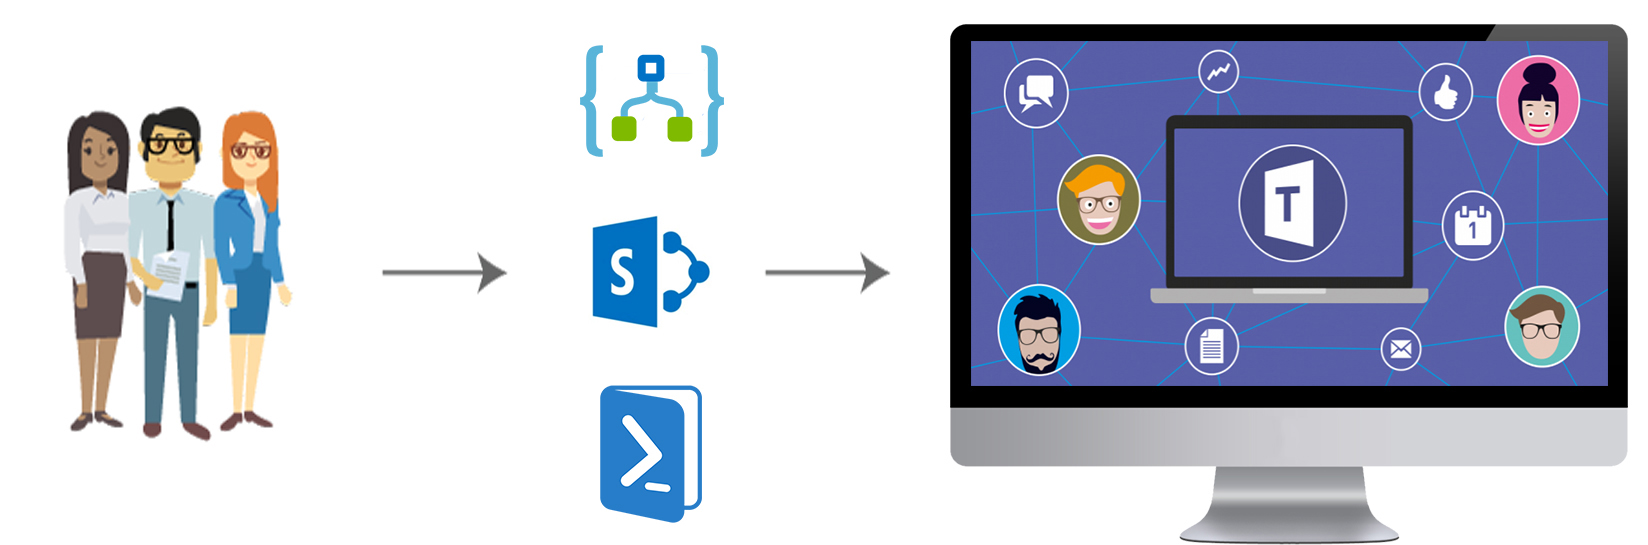 Microsoft Teams sharing to Logic Apps graphic